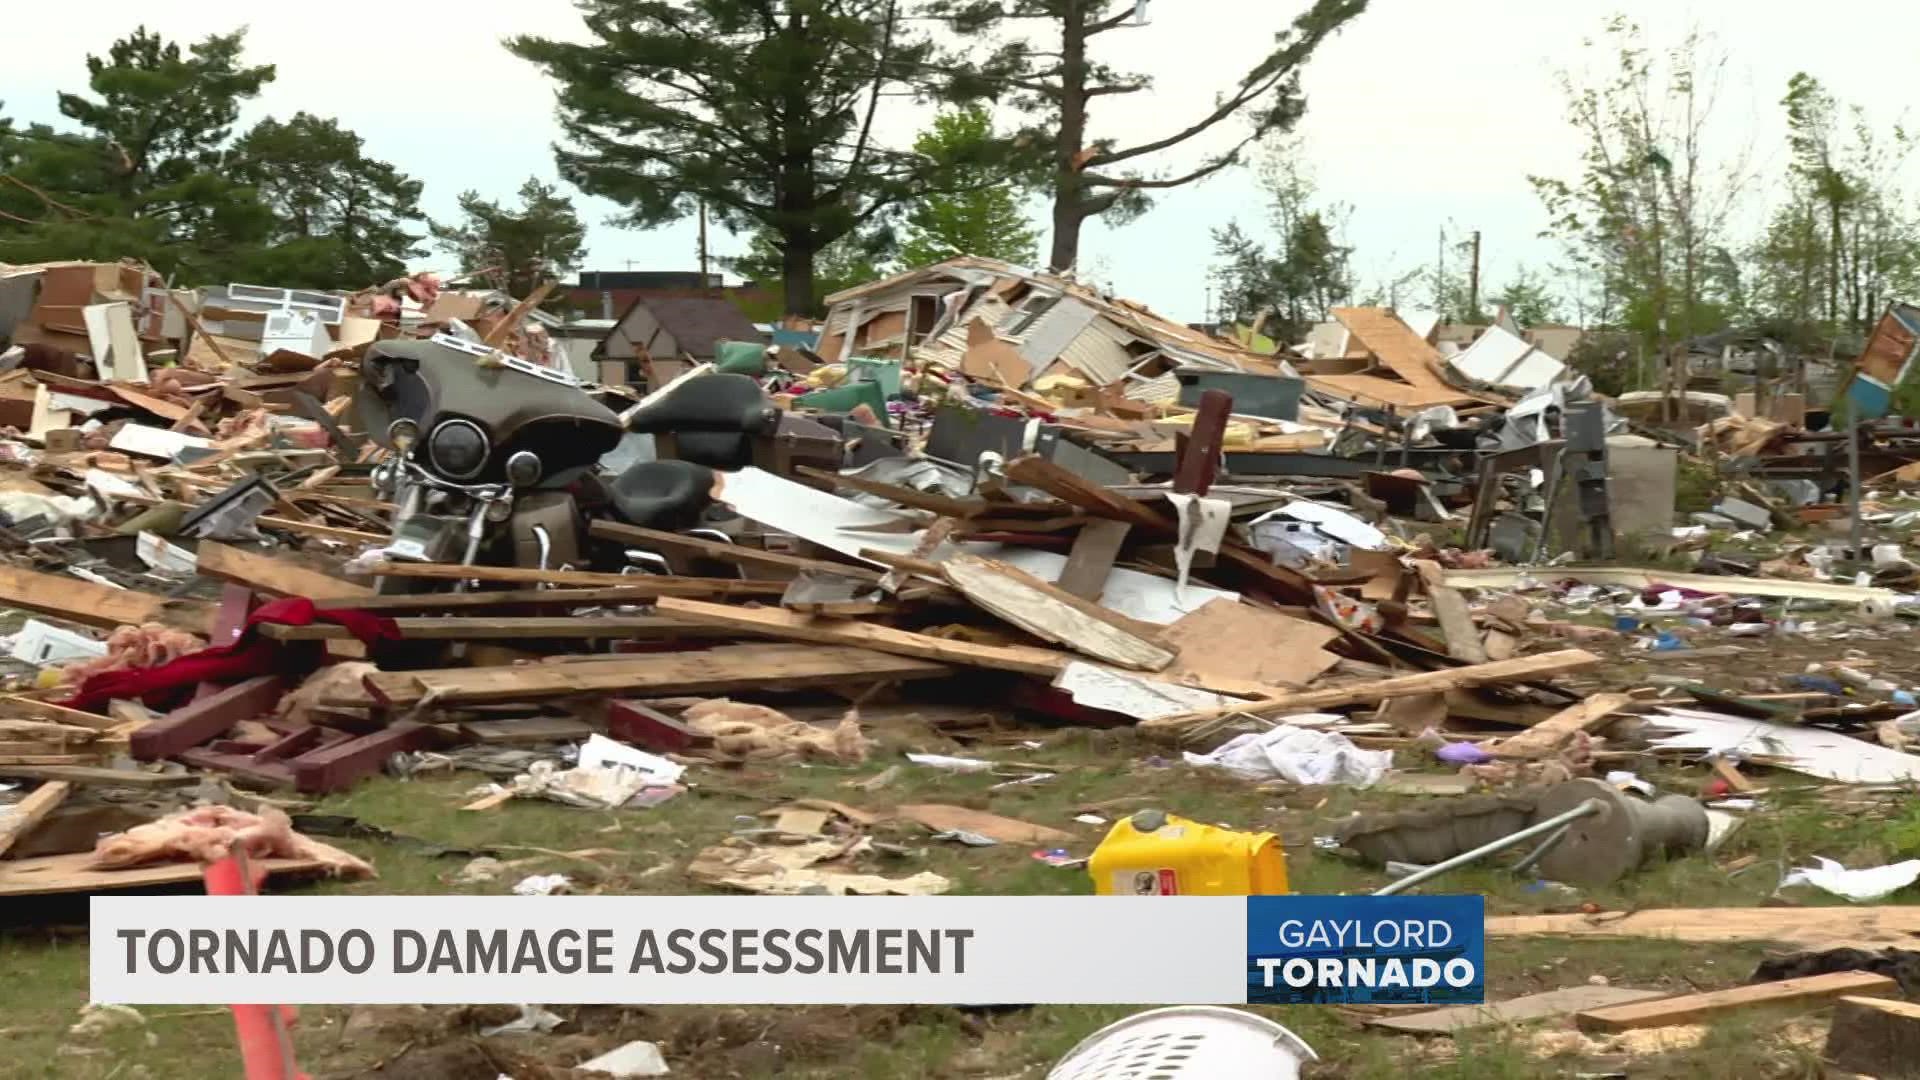 The collected damage totals and impact data will be used to determine whether the disaster meets the criteria that would warrant federal assistance.